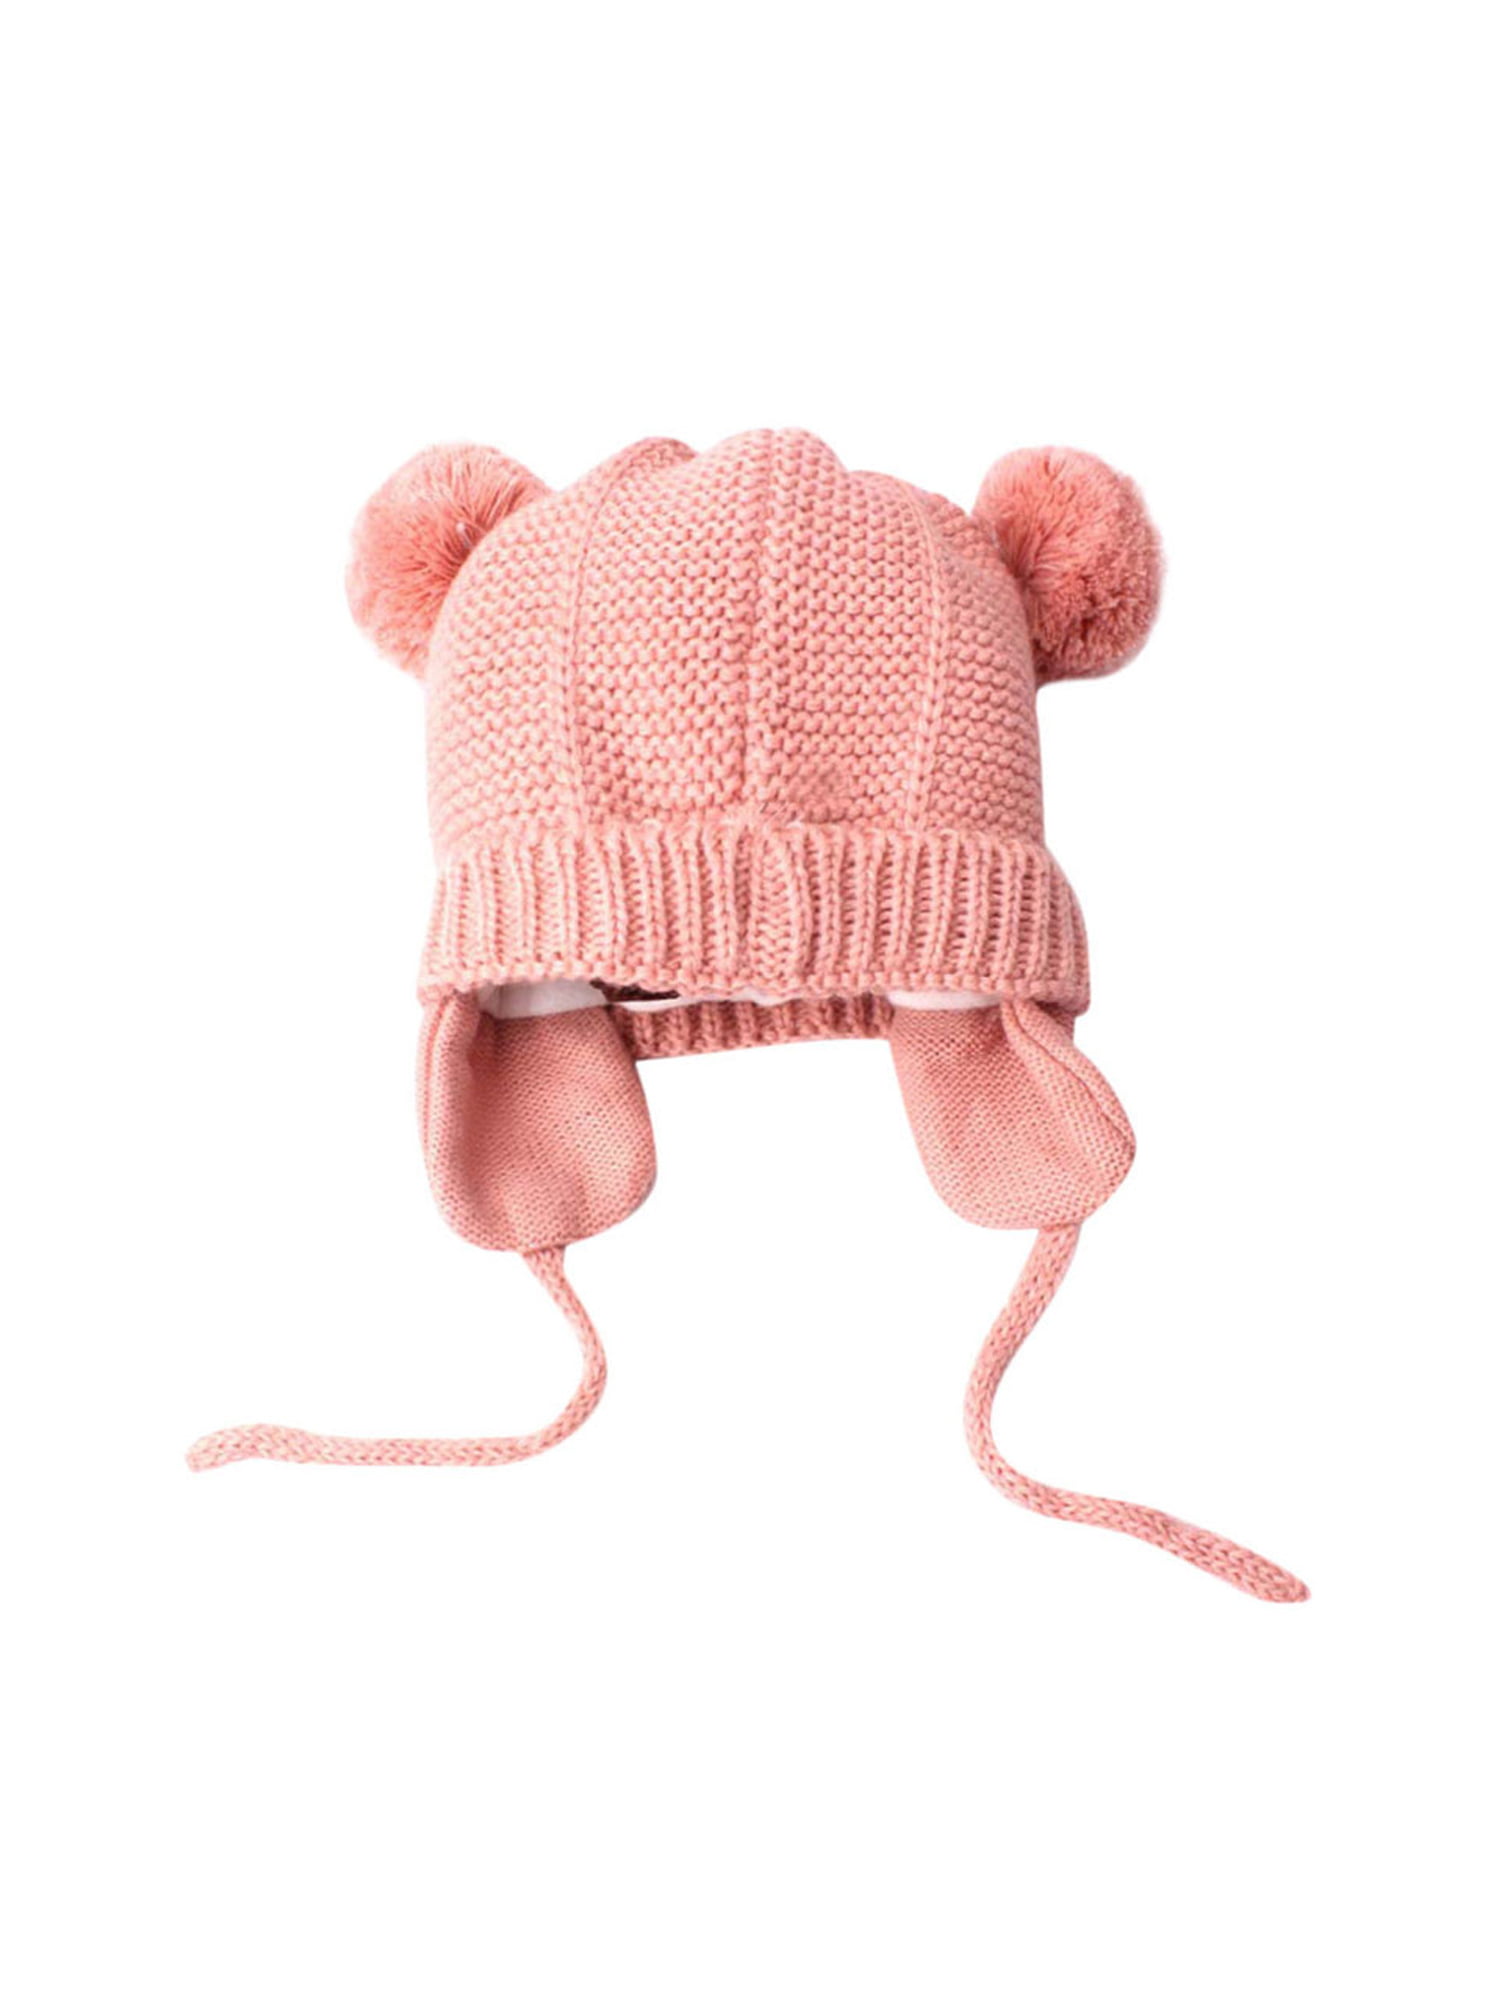 Infant Toddler Girls Boys Soft Warm Knit Hat Kids Winter Hat with Fleece Lining Baby Beanie Earflaps Hat